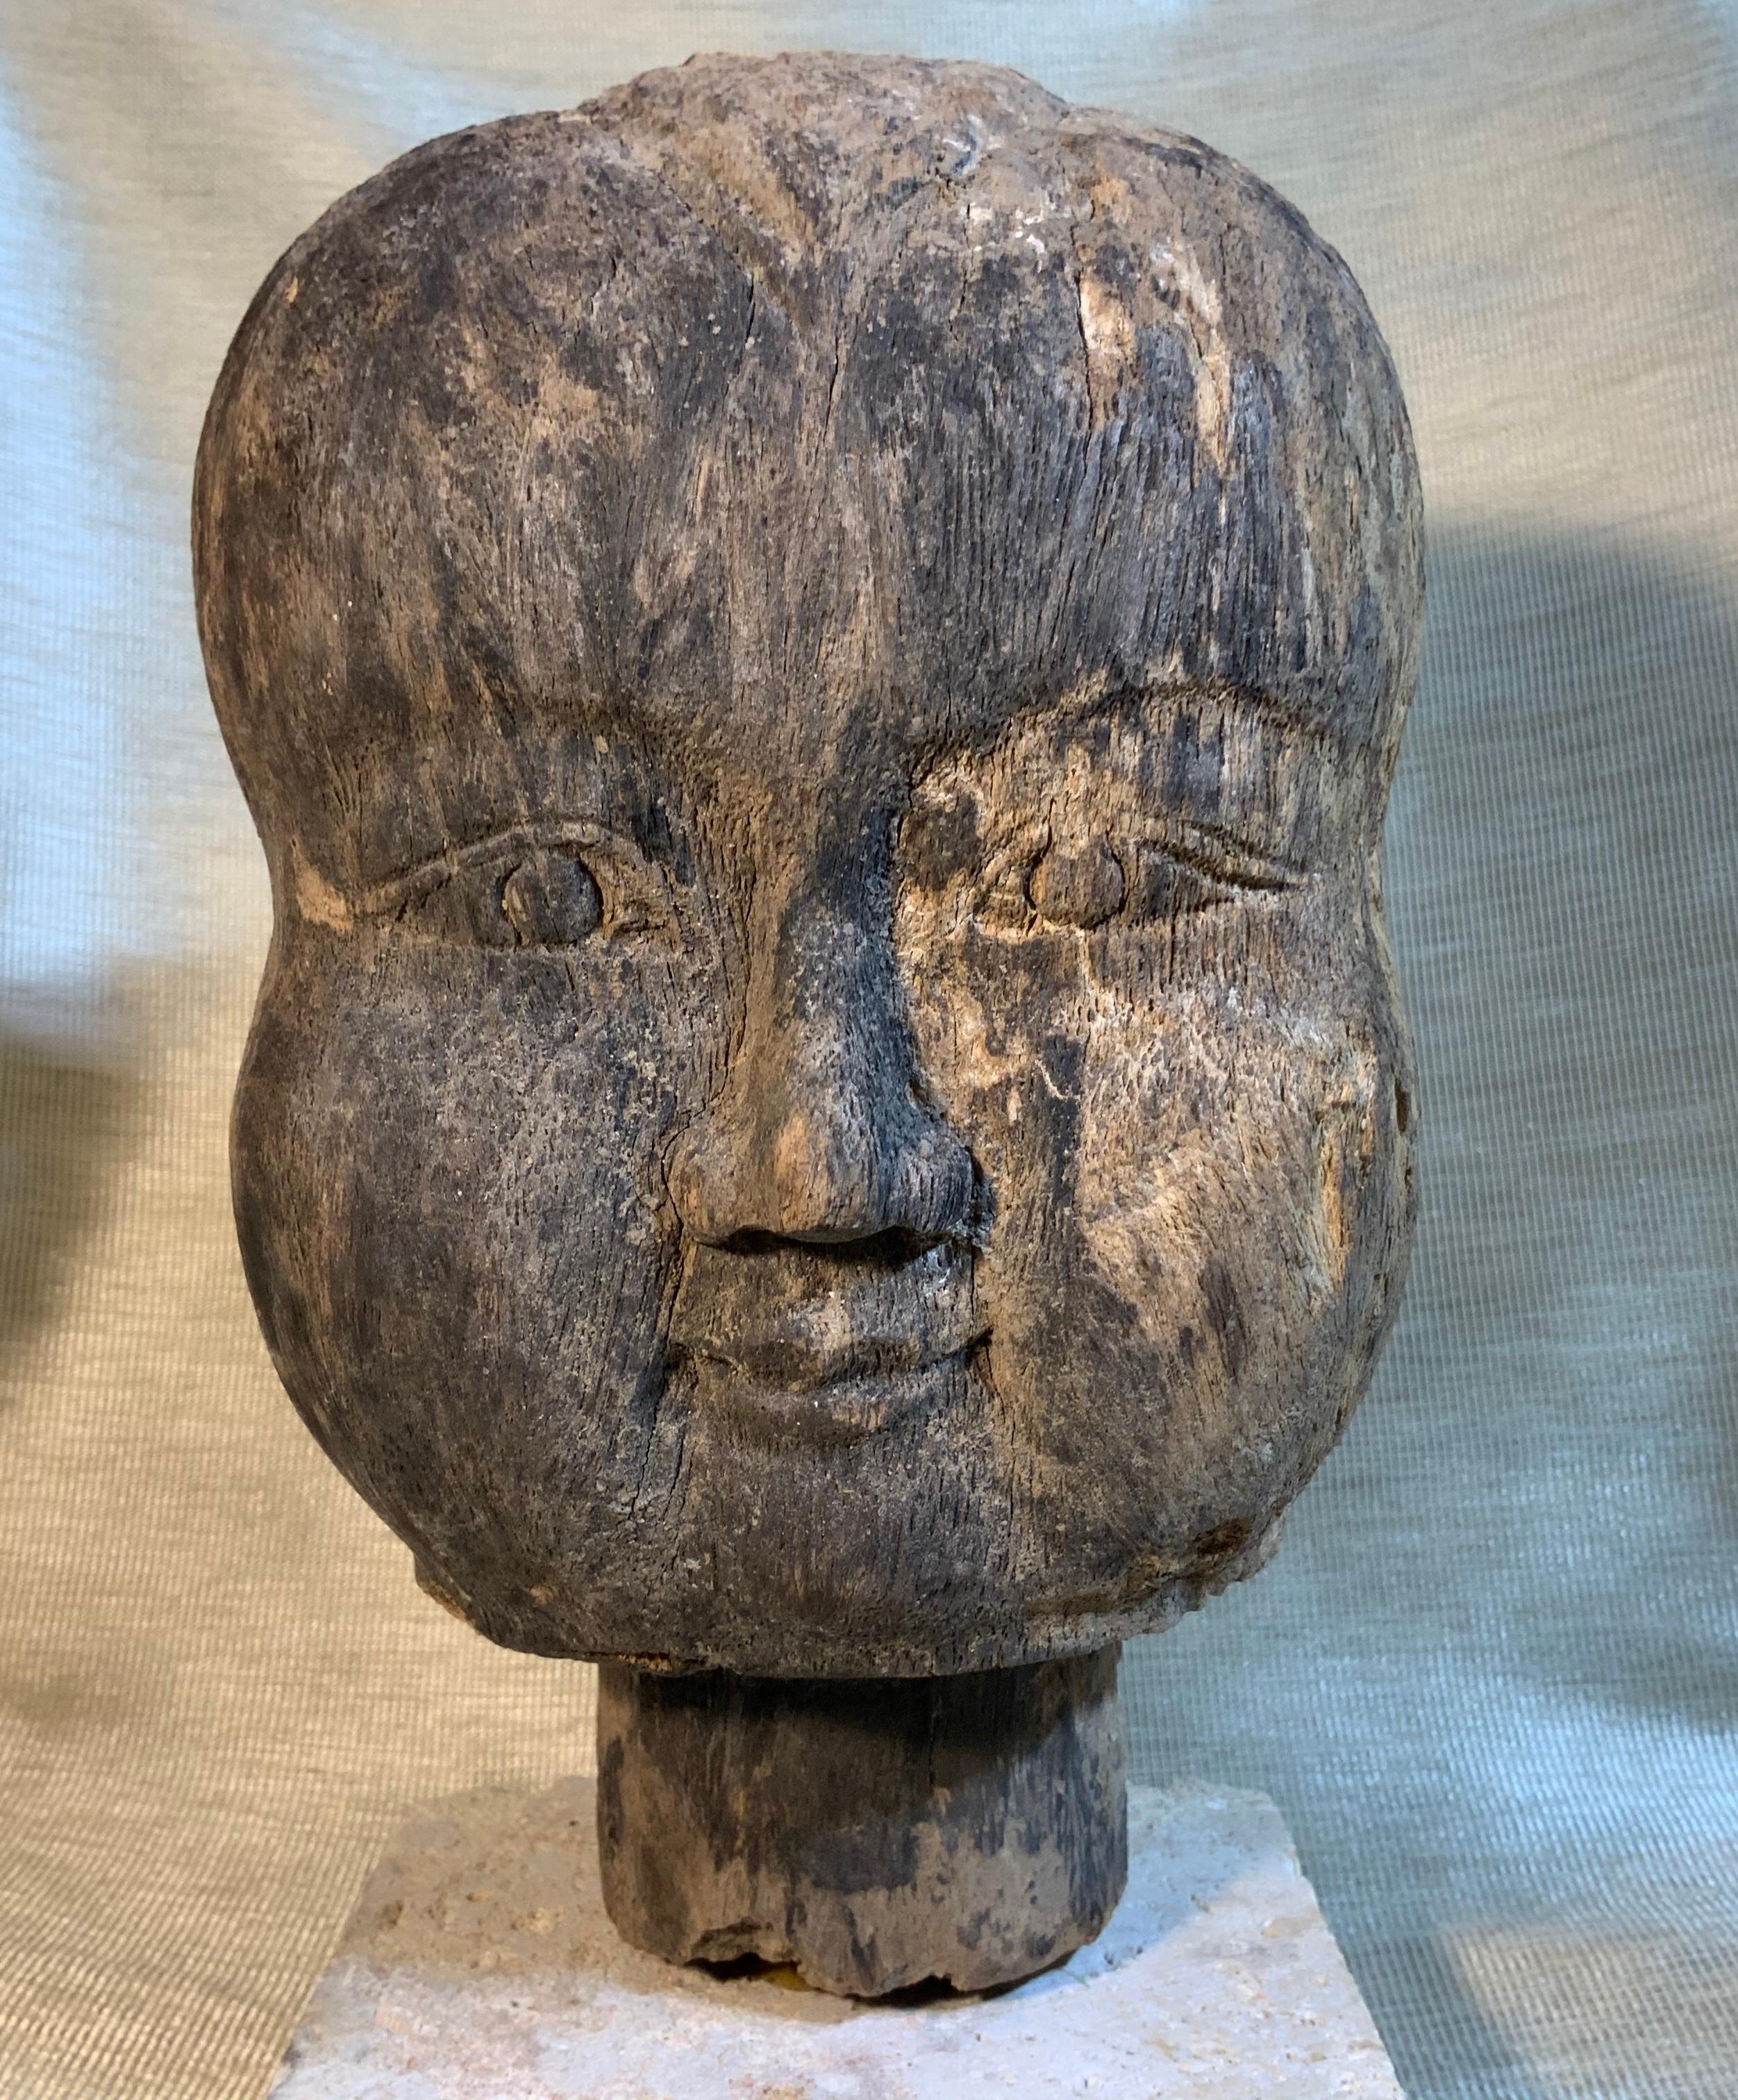 A beautiful 19th century Buddhist baby monk head, hand carved wood depicting the baby looking forward gracefully with like Mona Lisa kind smile?. Exceptional Buddhist antiquity That can make your day, whenever you look at it.
Professionally mounted